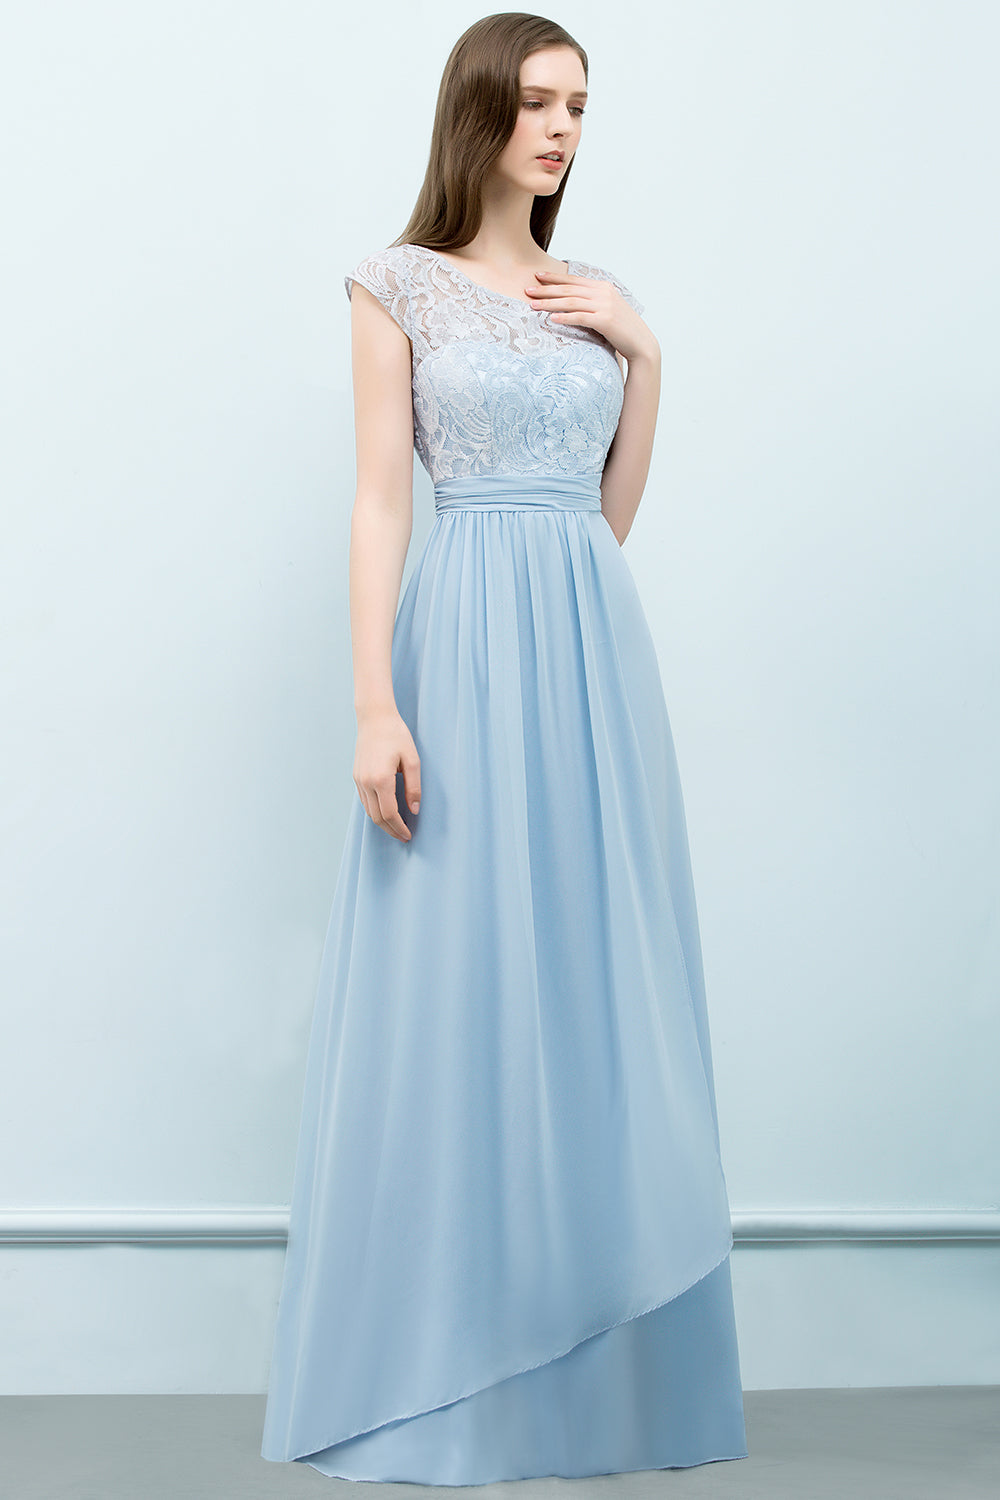 A-line Chiffon Lace Scoop Long Bridesmaid Dresses with Sleeves-BIZTUNNEL